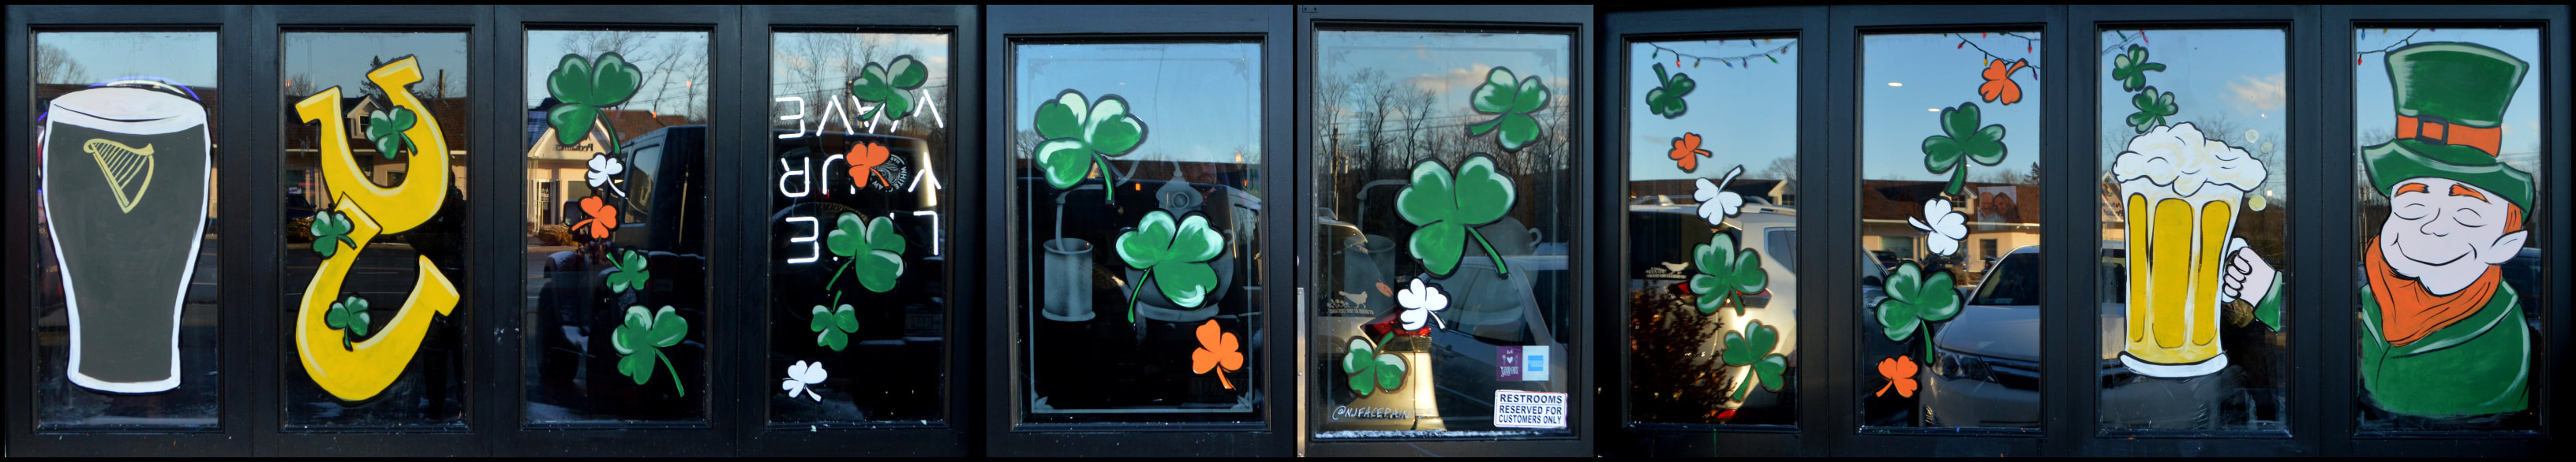 St. Patrick's Day Window Painting at The Copper Still in Pomona, Rockland County, NY